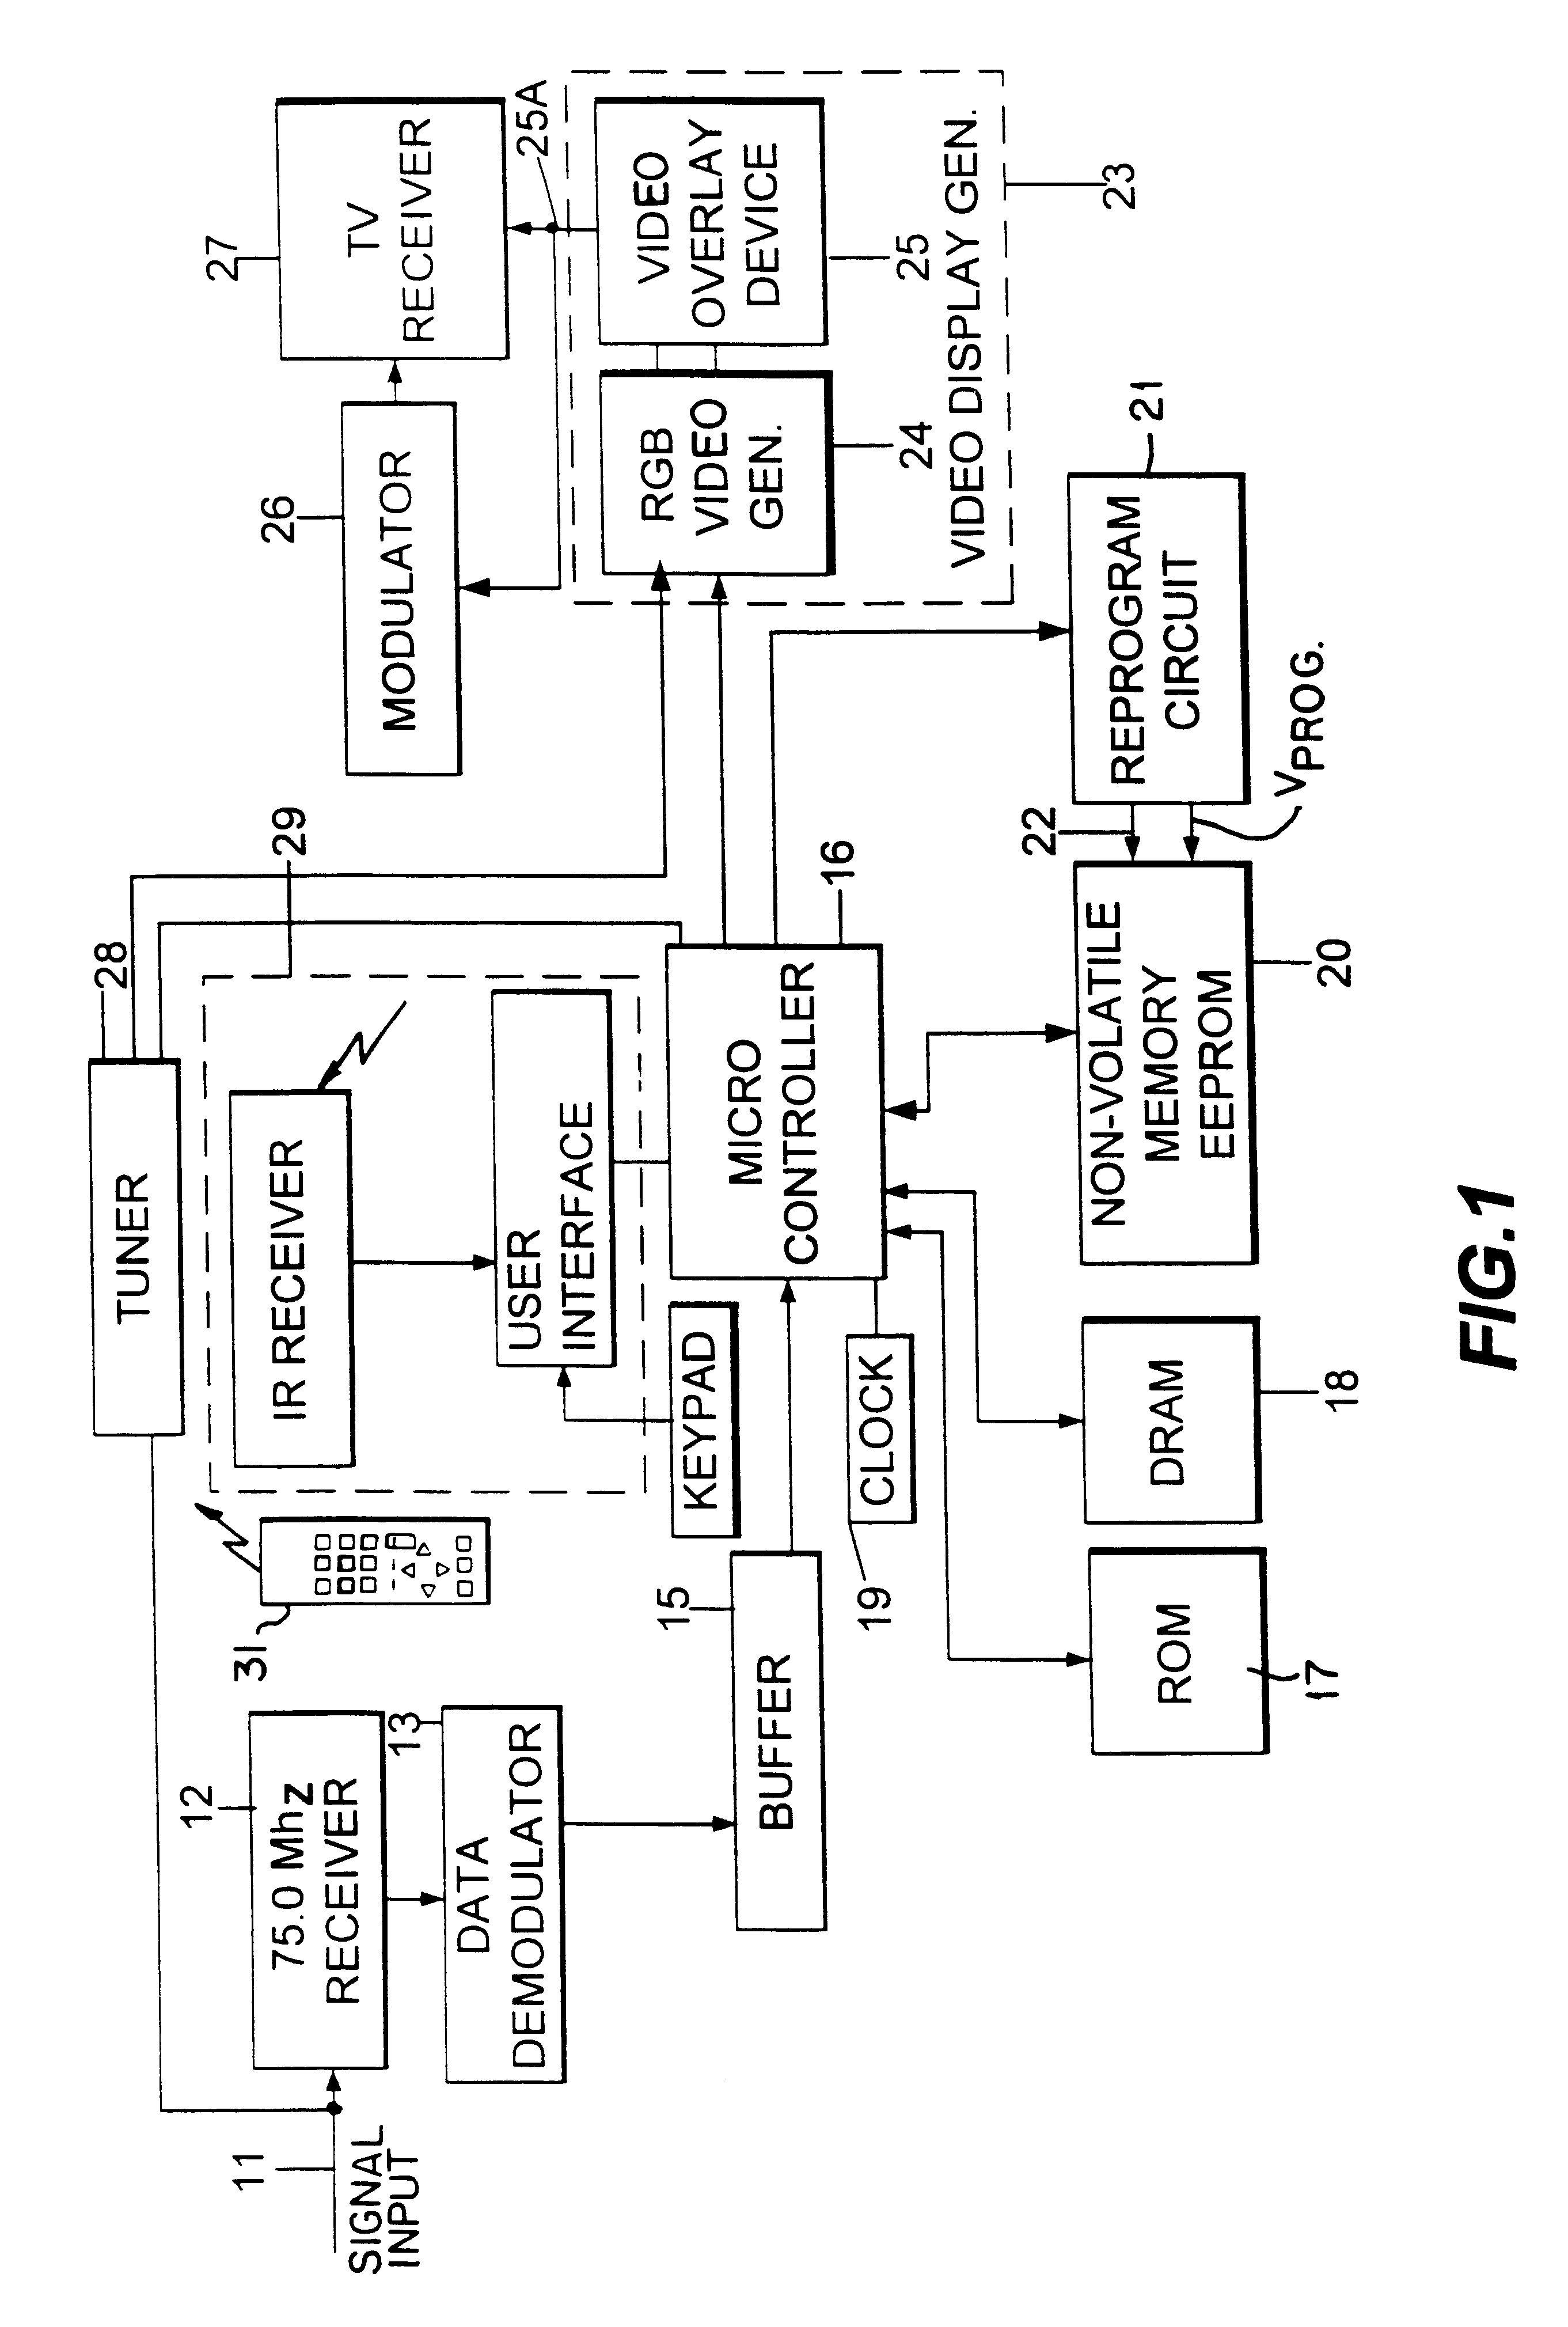 Electronic television program guide schedule system and method with scan feature